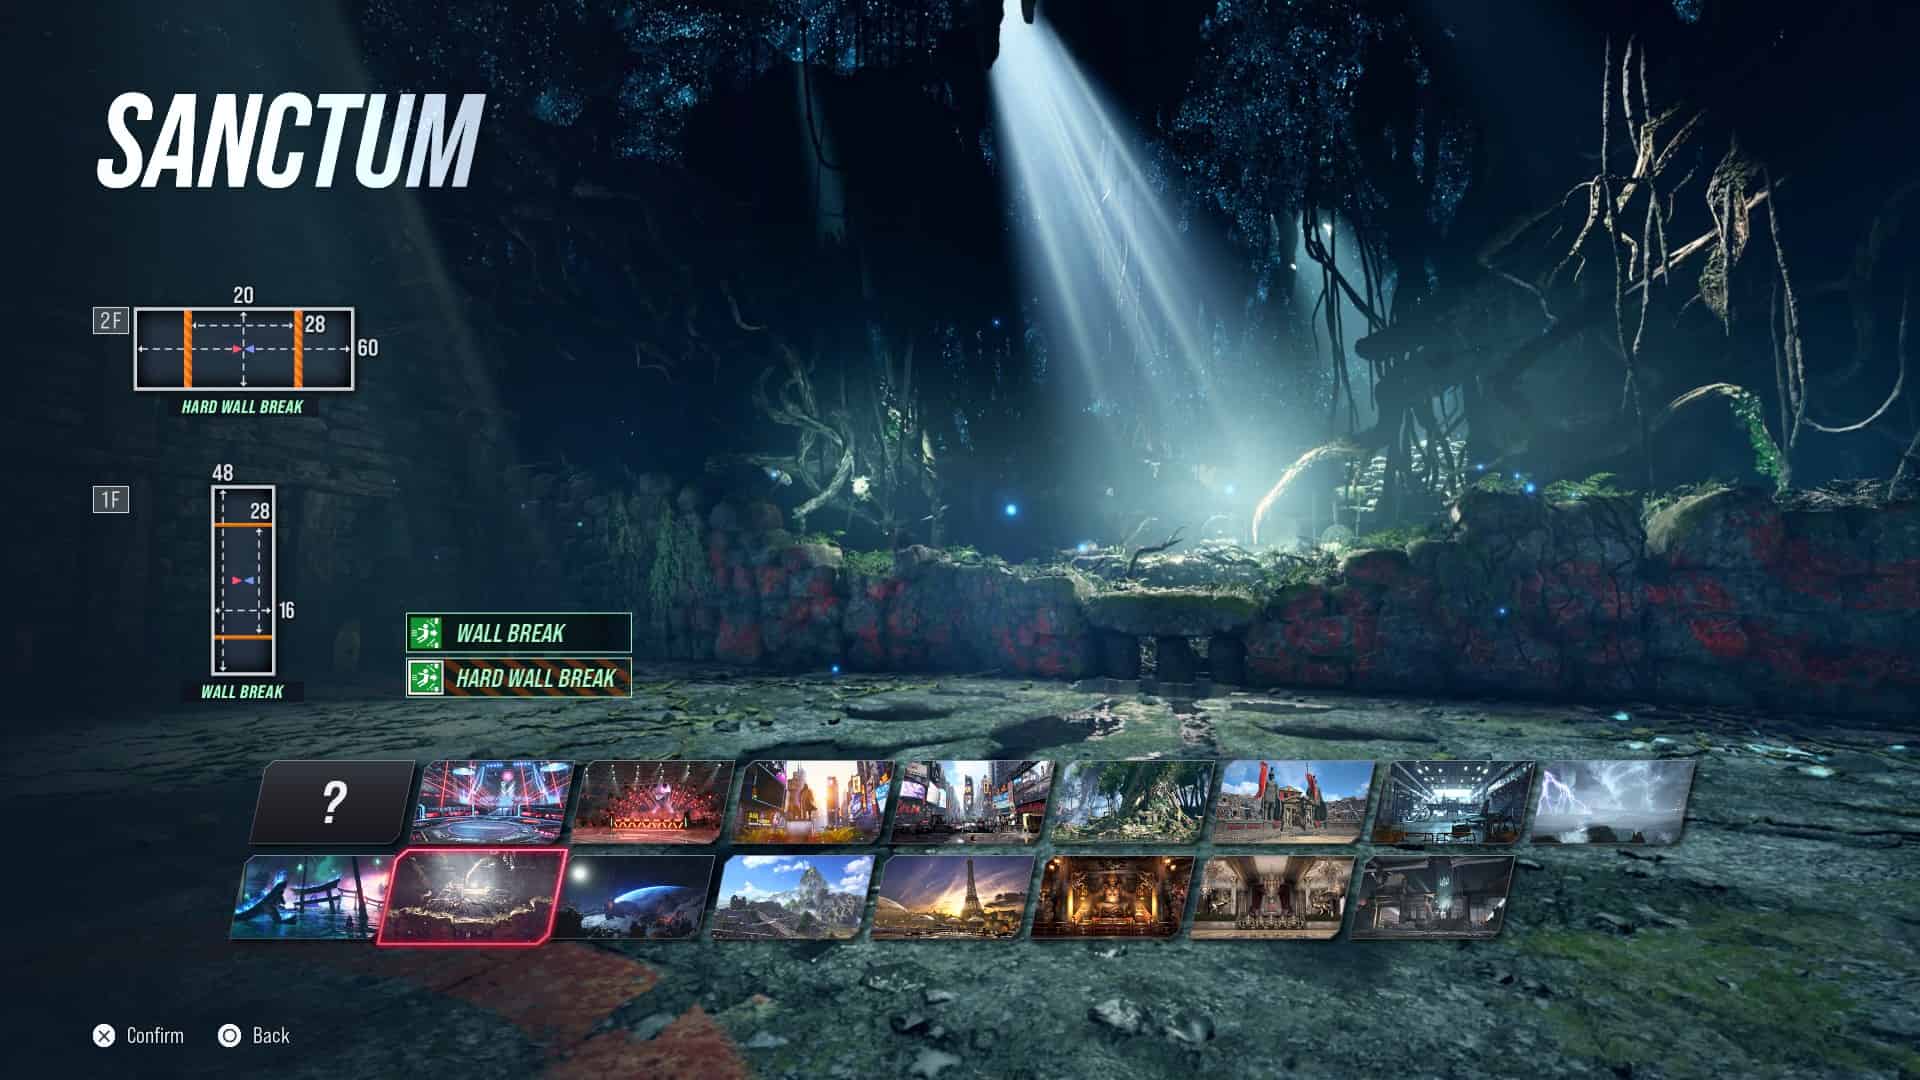 Tekken 8 stages: The Sanctum stage in the stage select screen